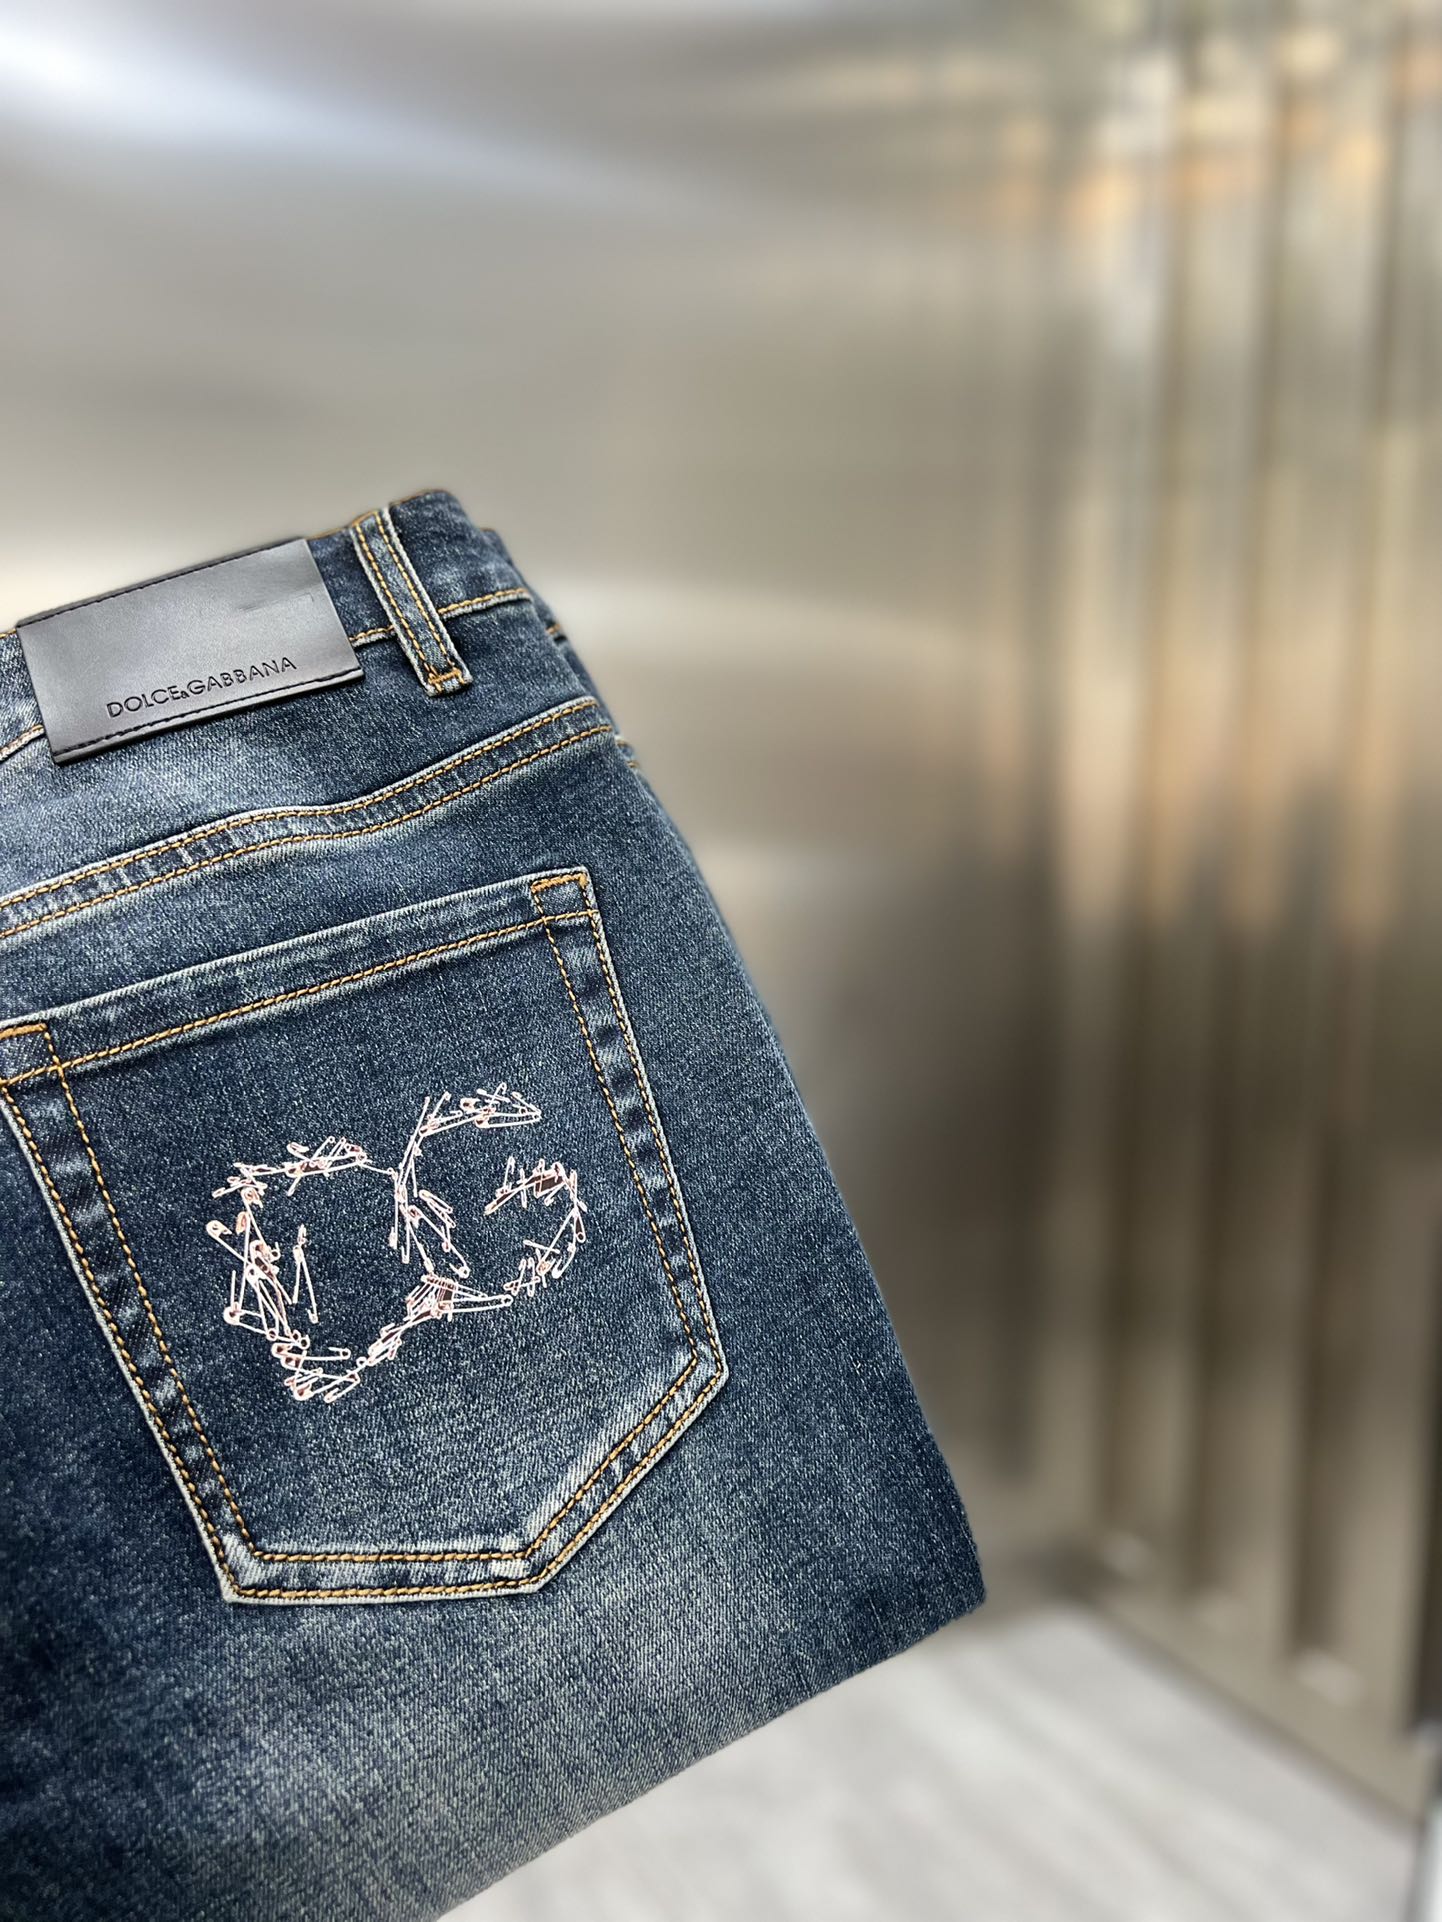 Dolce & Gabbana Clothing Jeans 1:1 Replica
 Fall/Winter Collection